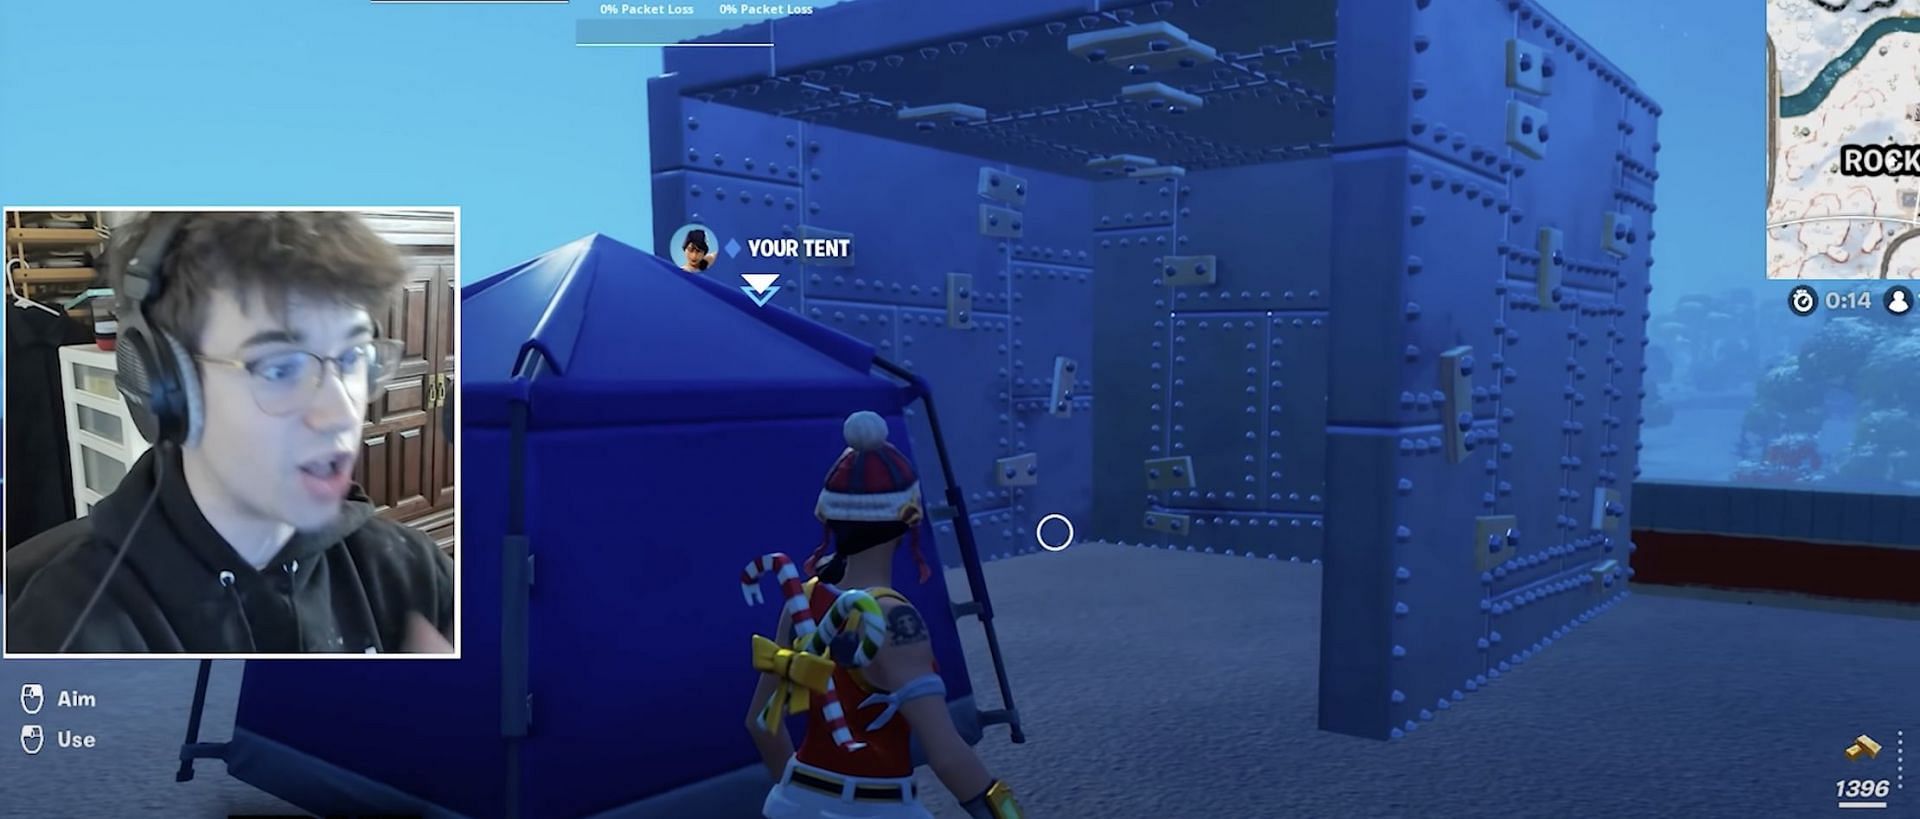 Breaking Armored Walls in Fortnite using a Tent (Image via Melt/YouTube)